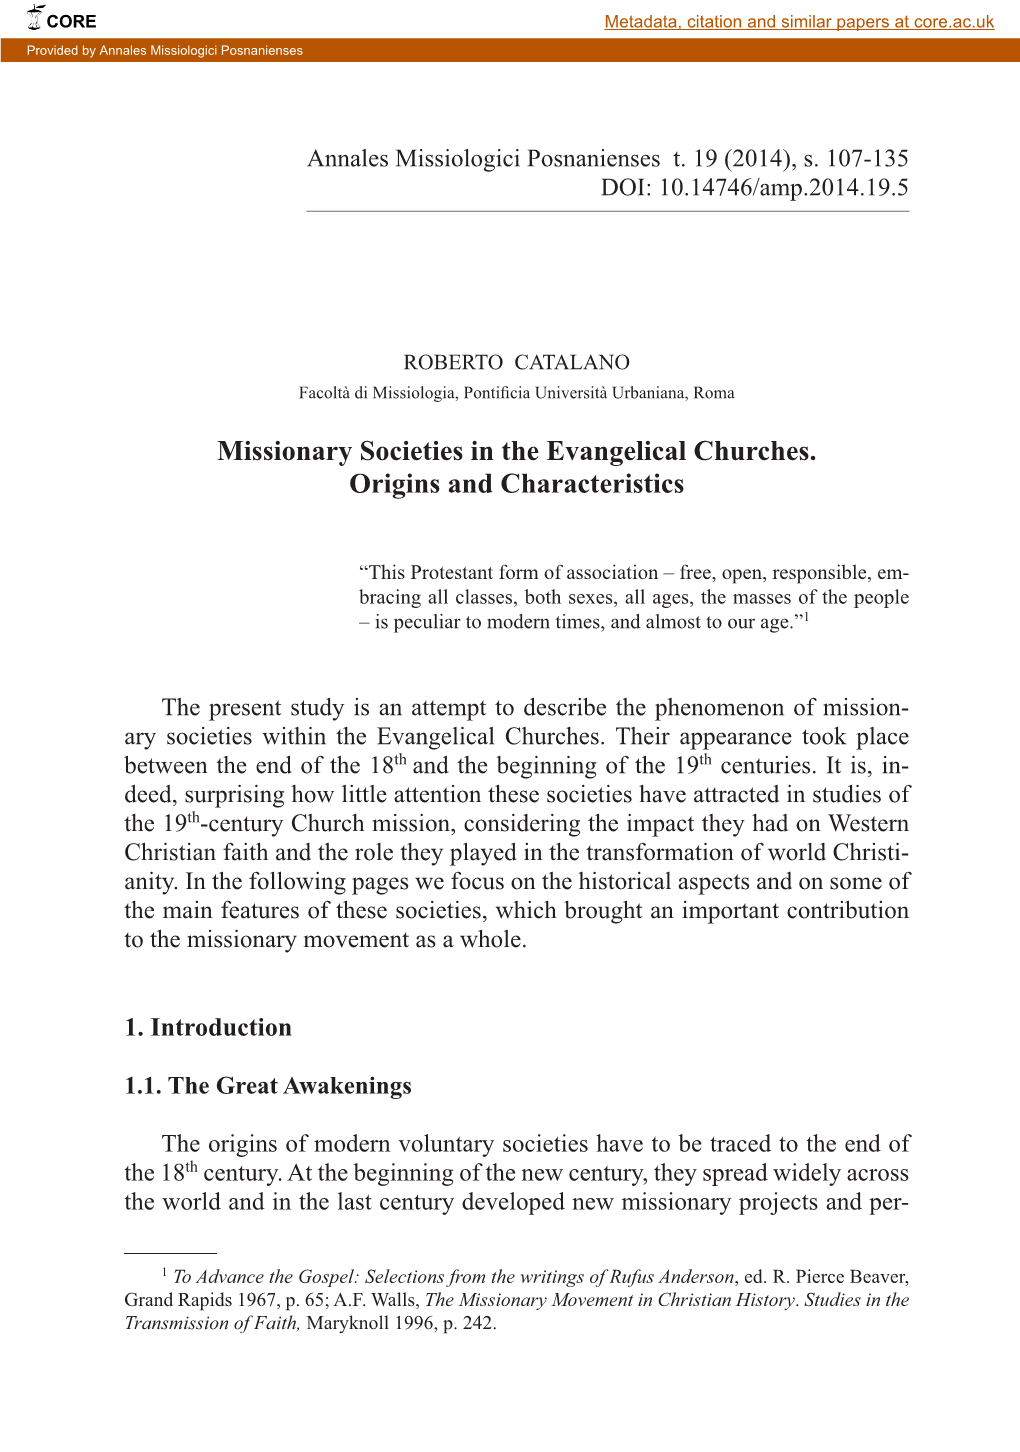 Missionary Societies in the Evangelical Churches. Origins and Characteristics Missionary Societies in the Evangelical Churches